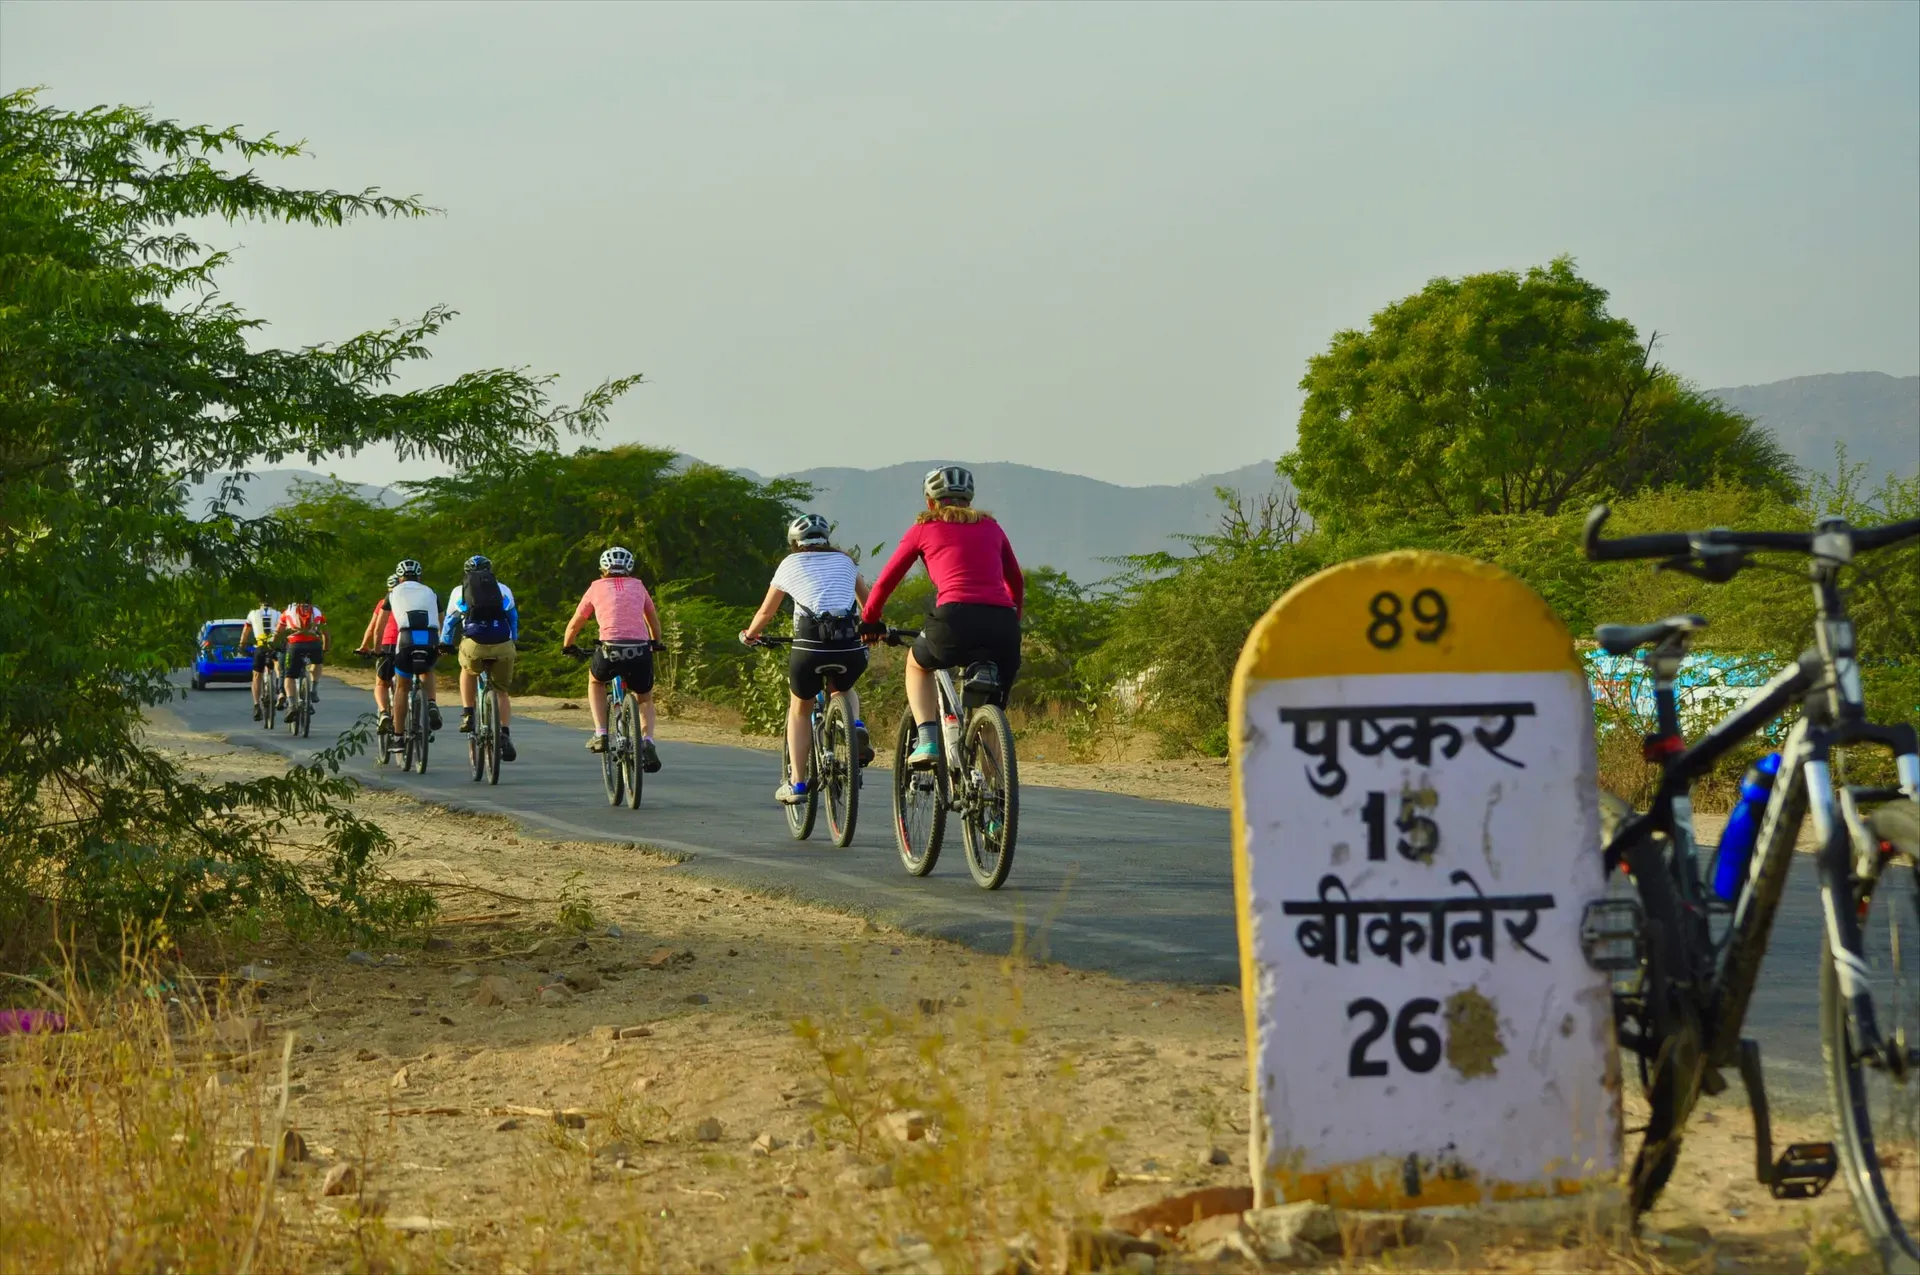 Cyclists on a quiet road in Rajasthan, India.